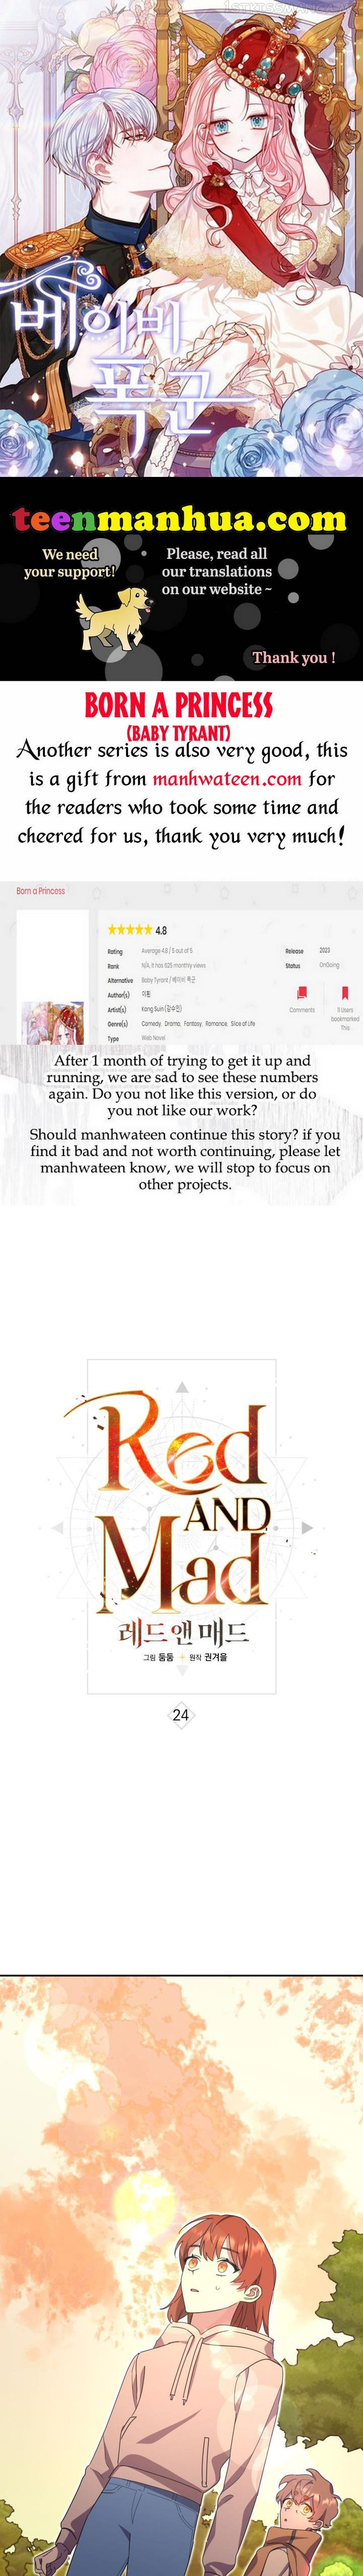 Red And Mad - Page 1